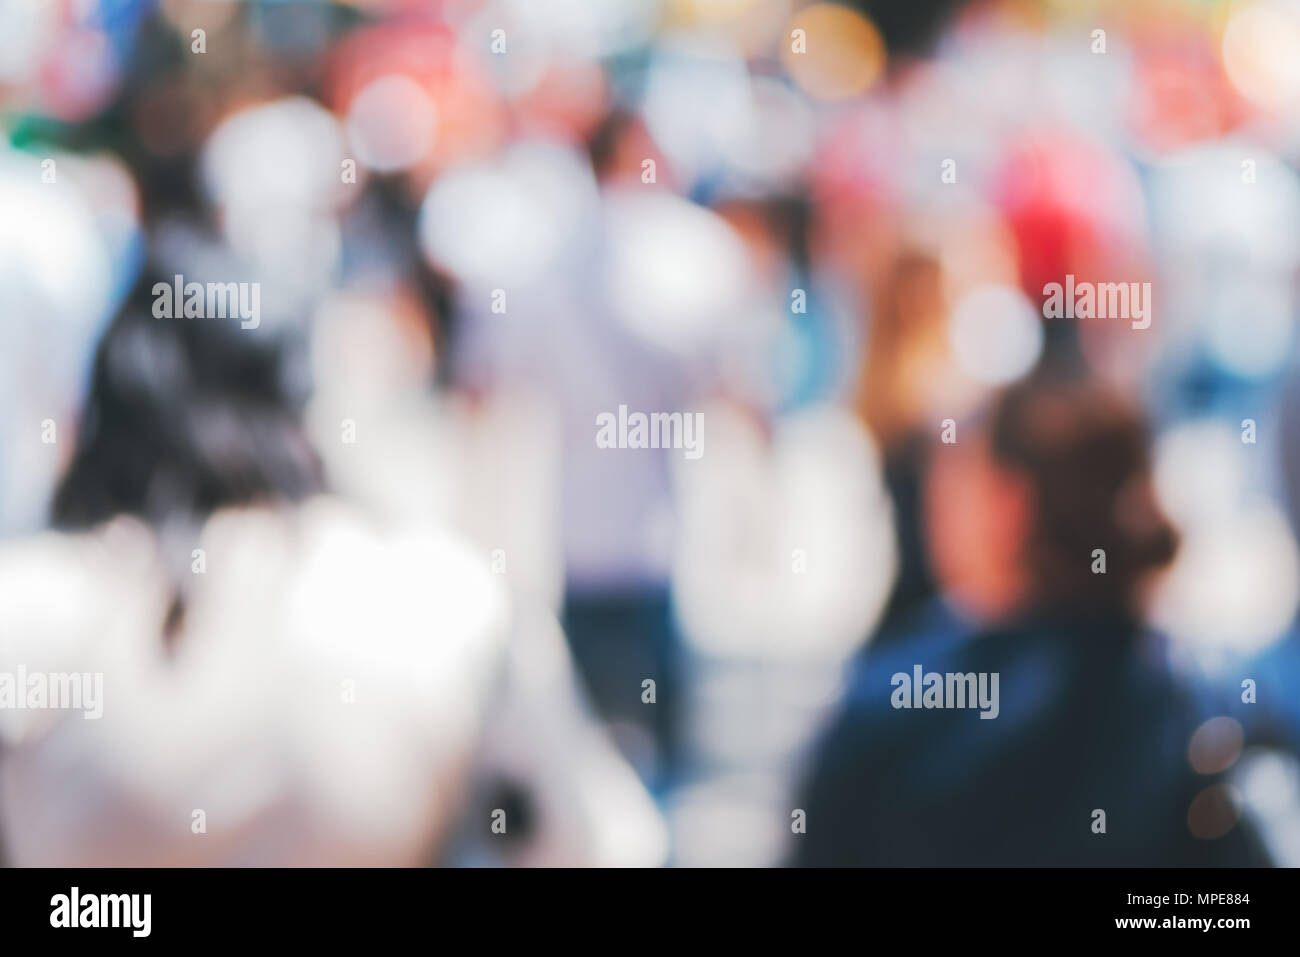 Blurred street crowd as abstract background as web site graphic design element Stock Photo